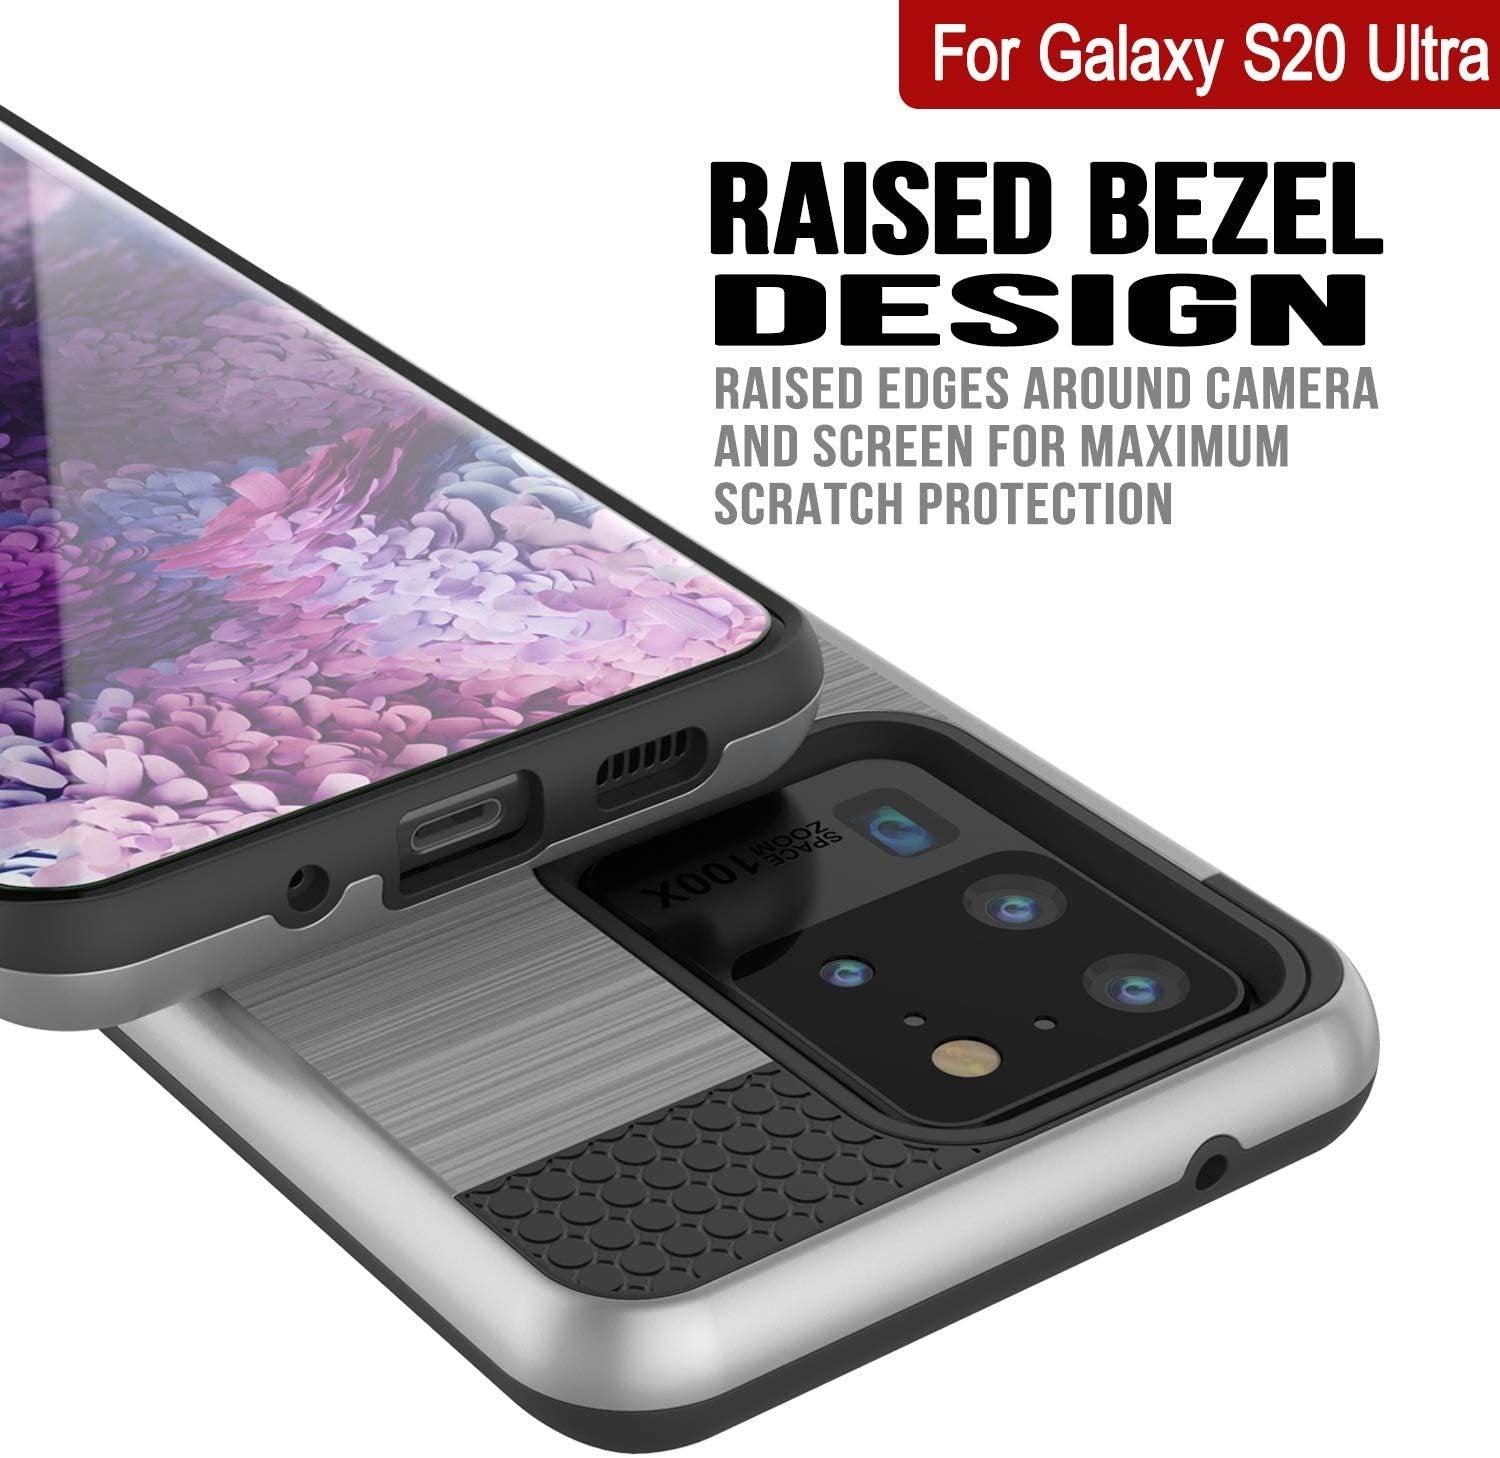 Galaxy S20 Ultra Case, PUNKcase [SLOT Series] [Slim Fit] Dual-Layer Armor Cover w/Integrated Anti-Shock System, Credit Card Slot [Silver]